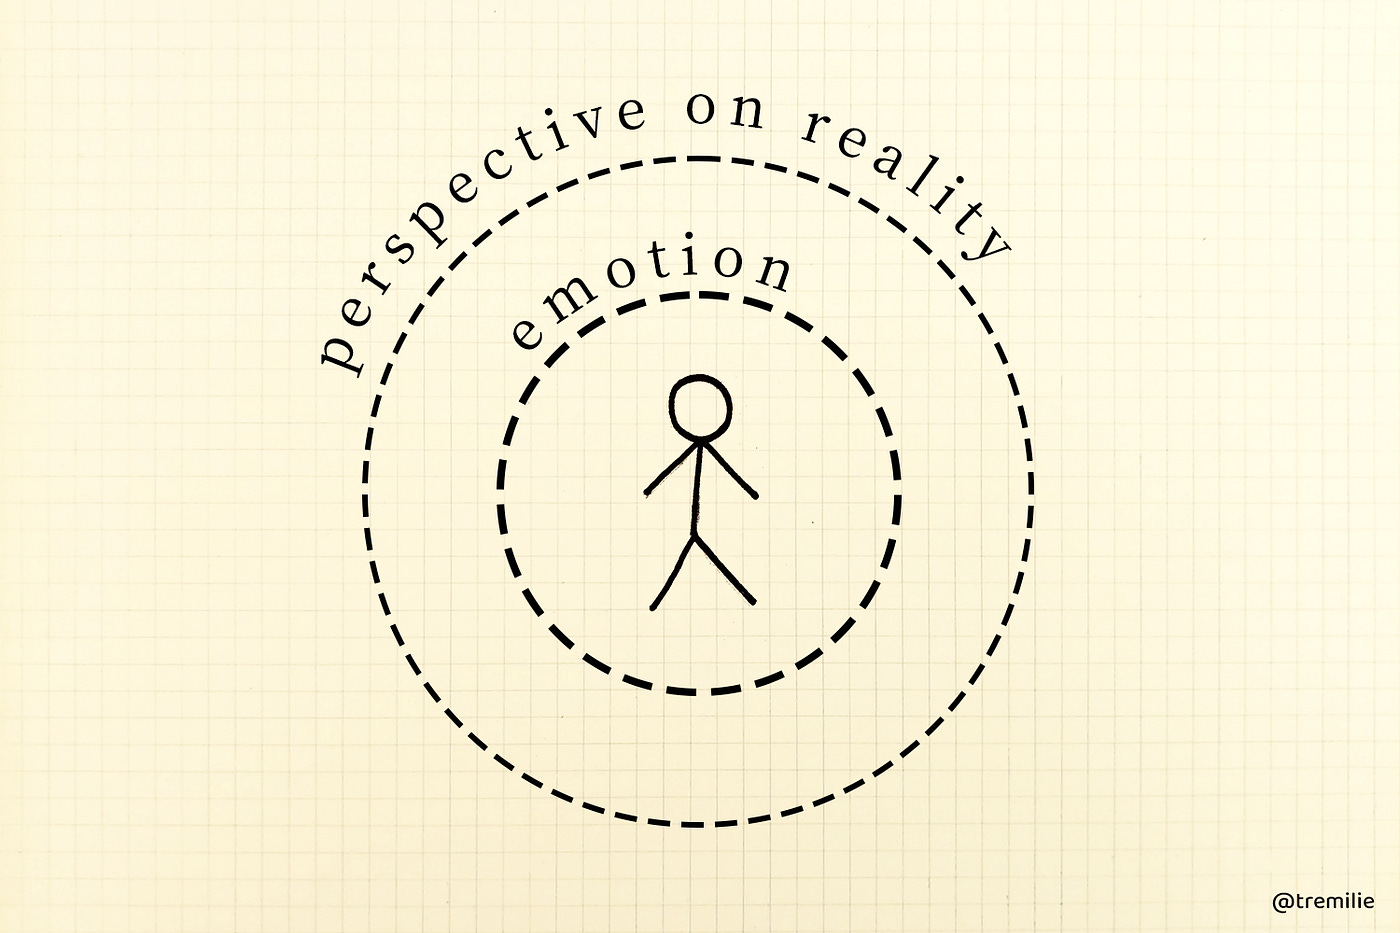 Drawing of a stick figure inside a circle labelled “emotion”, which is inside a bigger circle labelled “perspective on reality”.